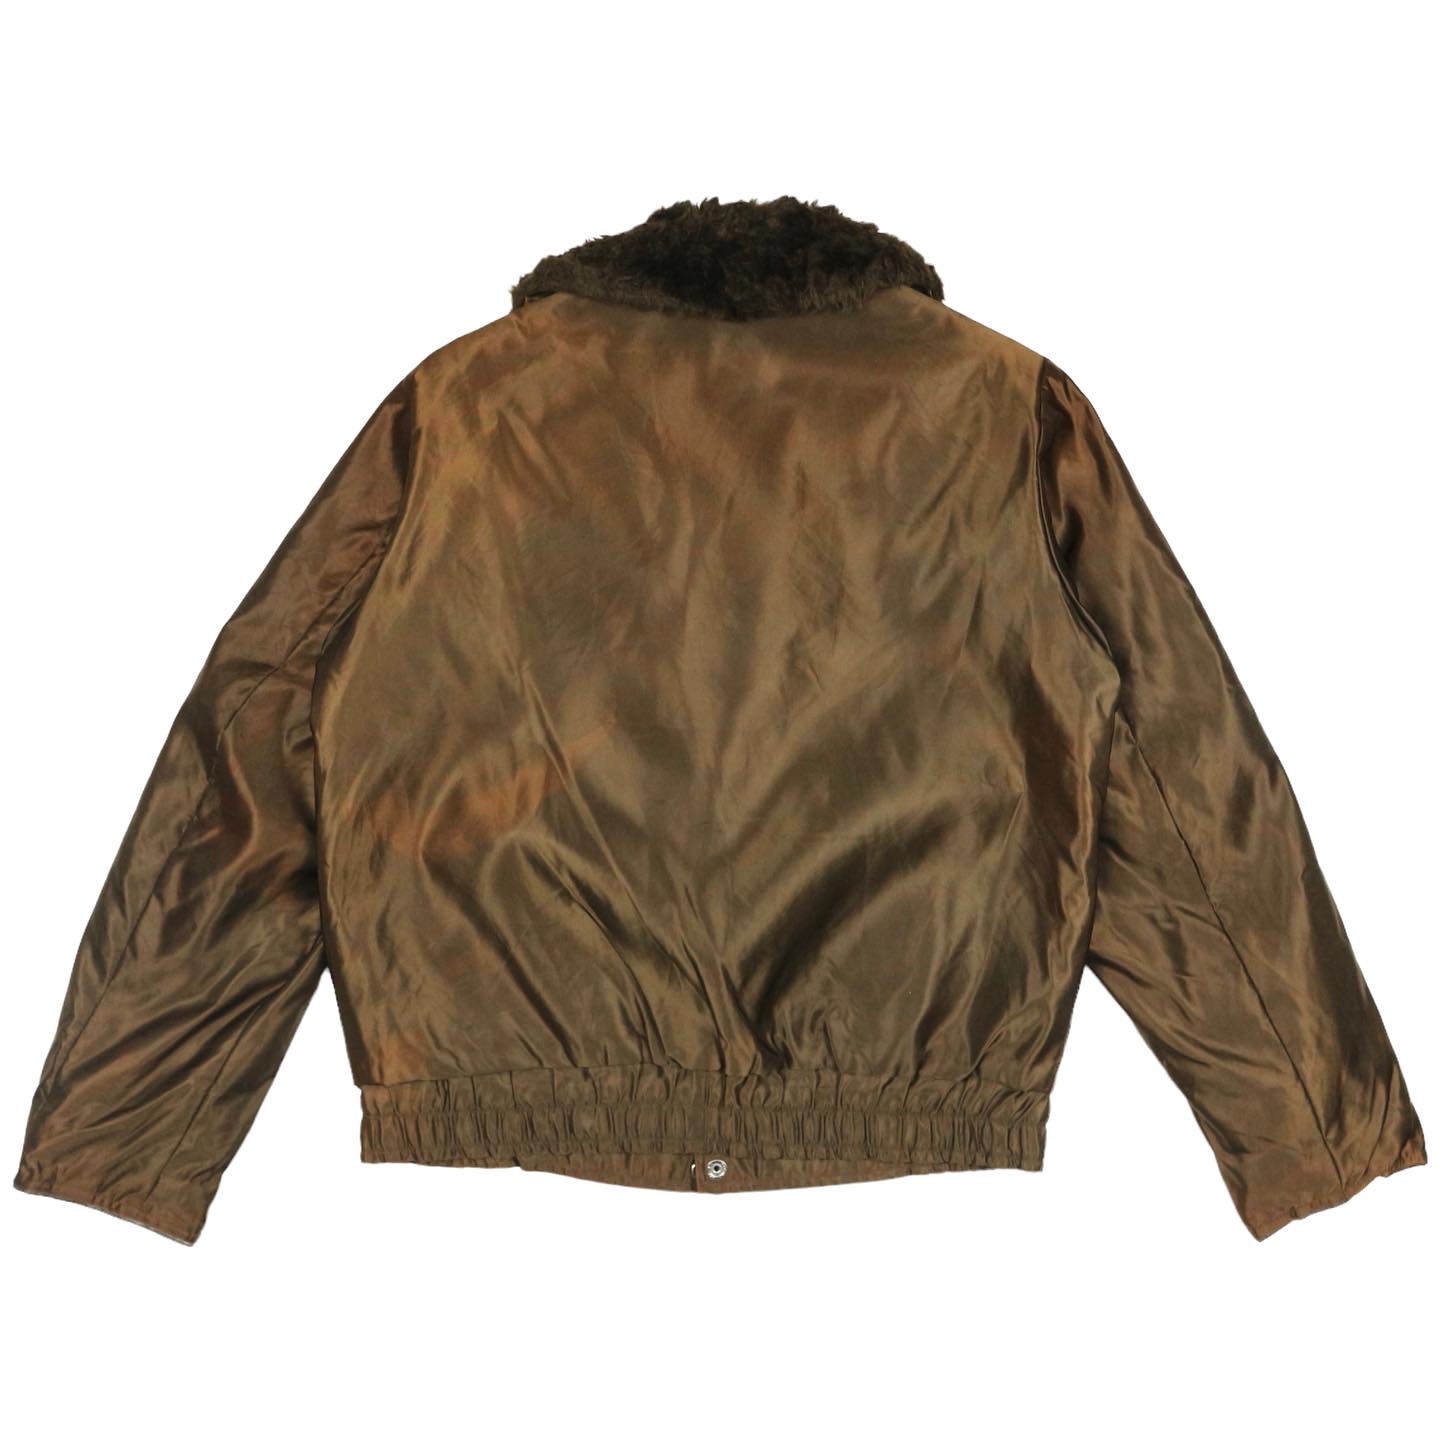 The Lawman Police Jacket Size L